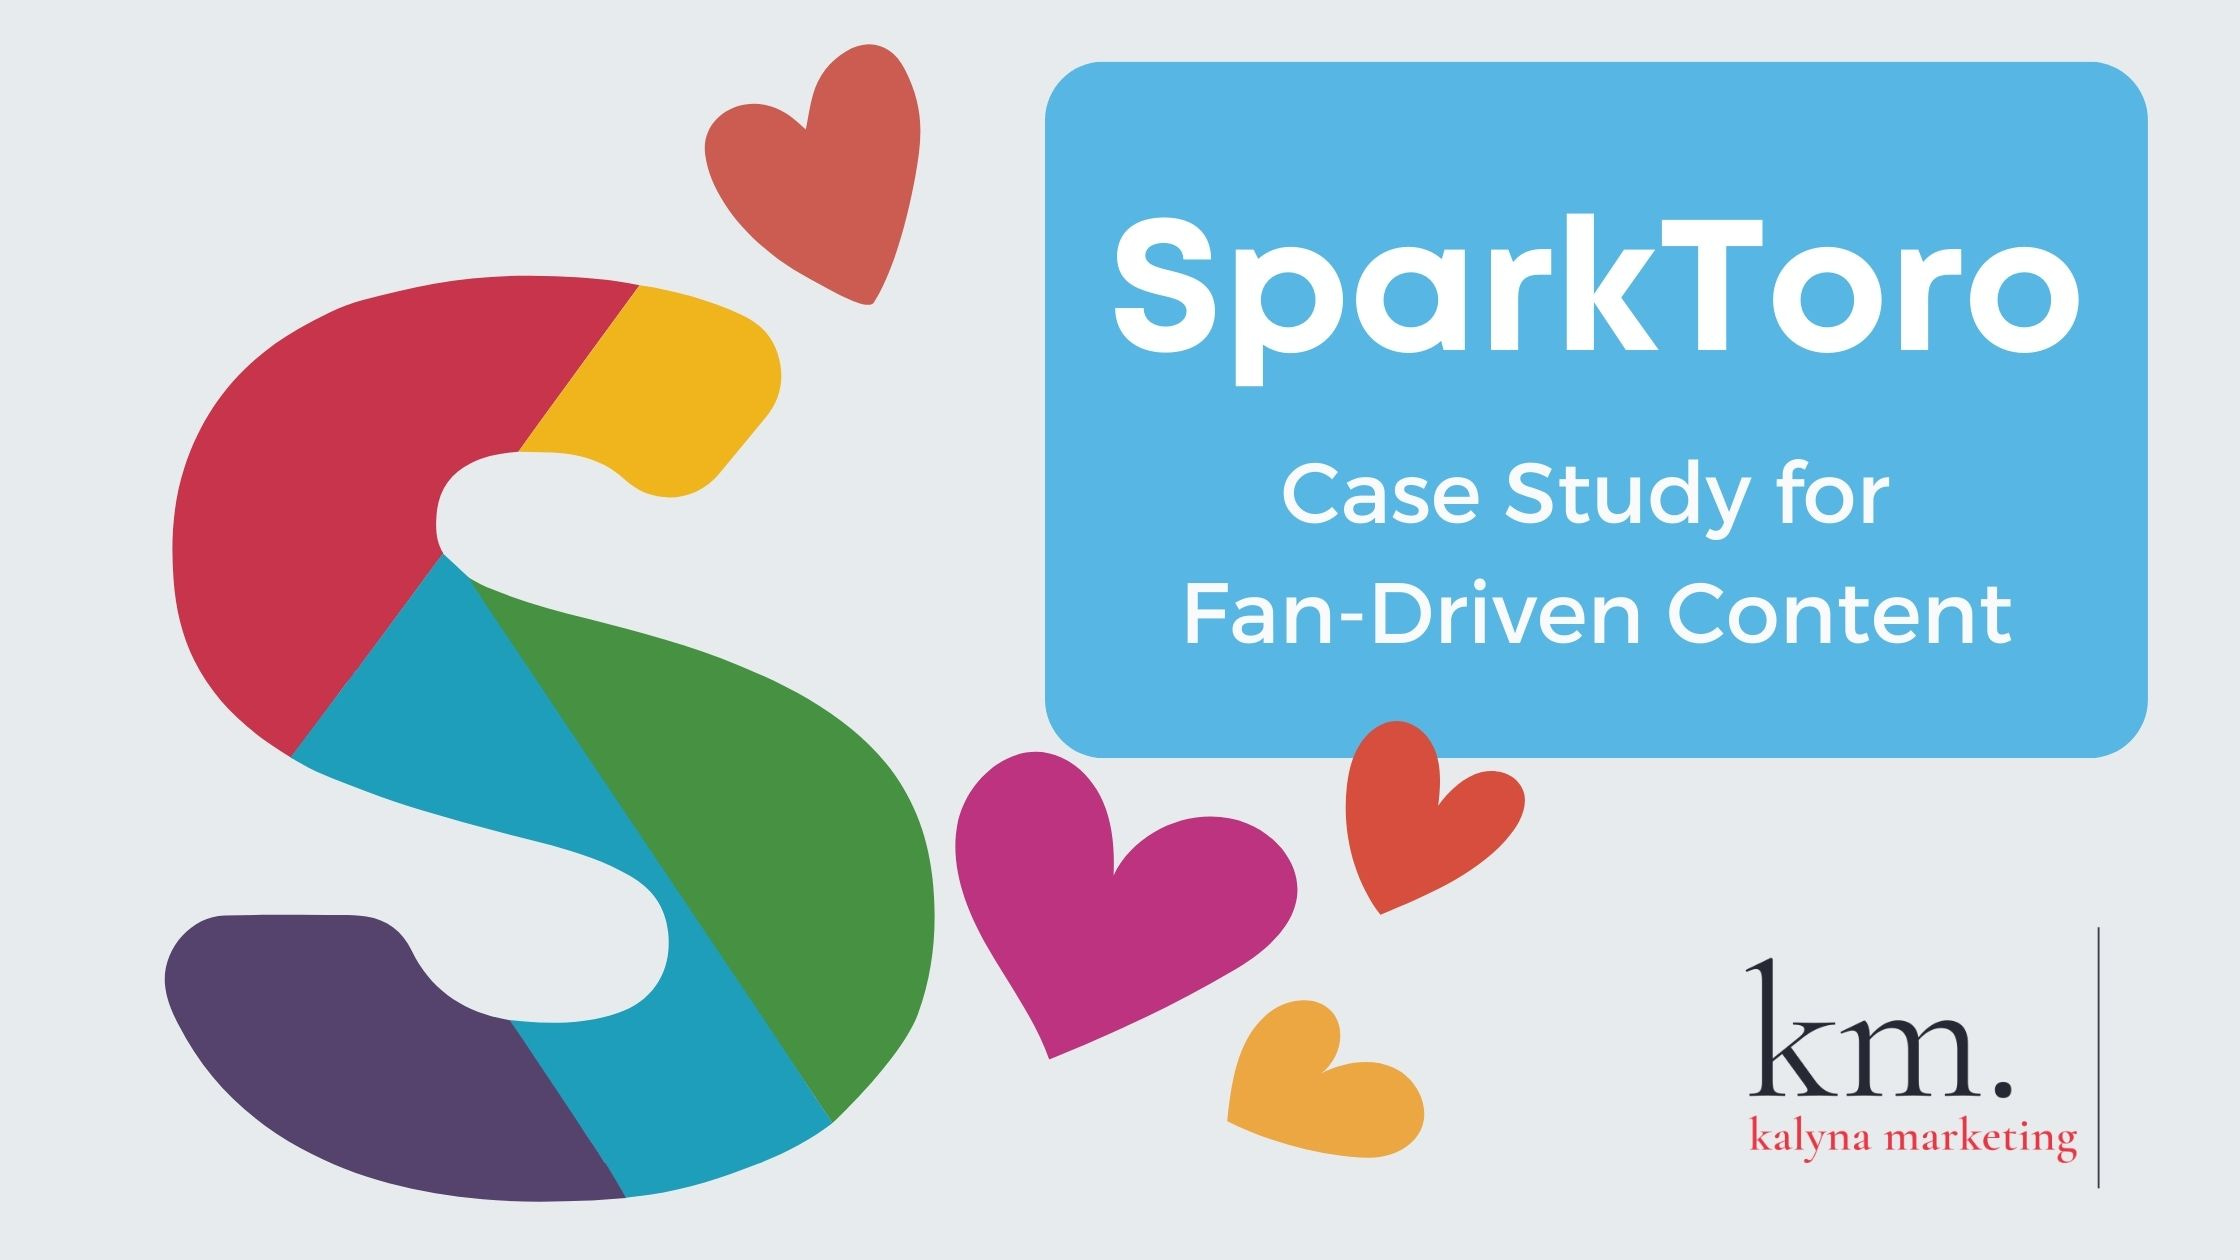 raphic showcasing the SparkToro "S" logo, a bunch of heart icons, and a box labeled "SparkToro: case study for fan-driven content"